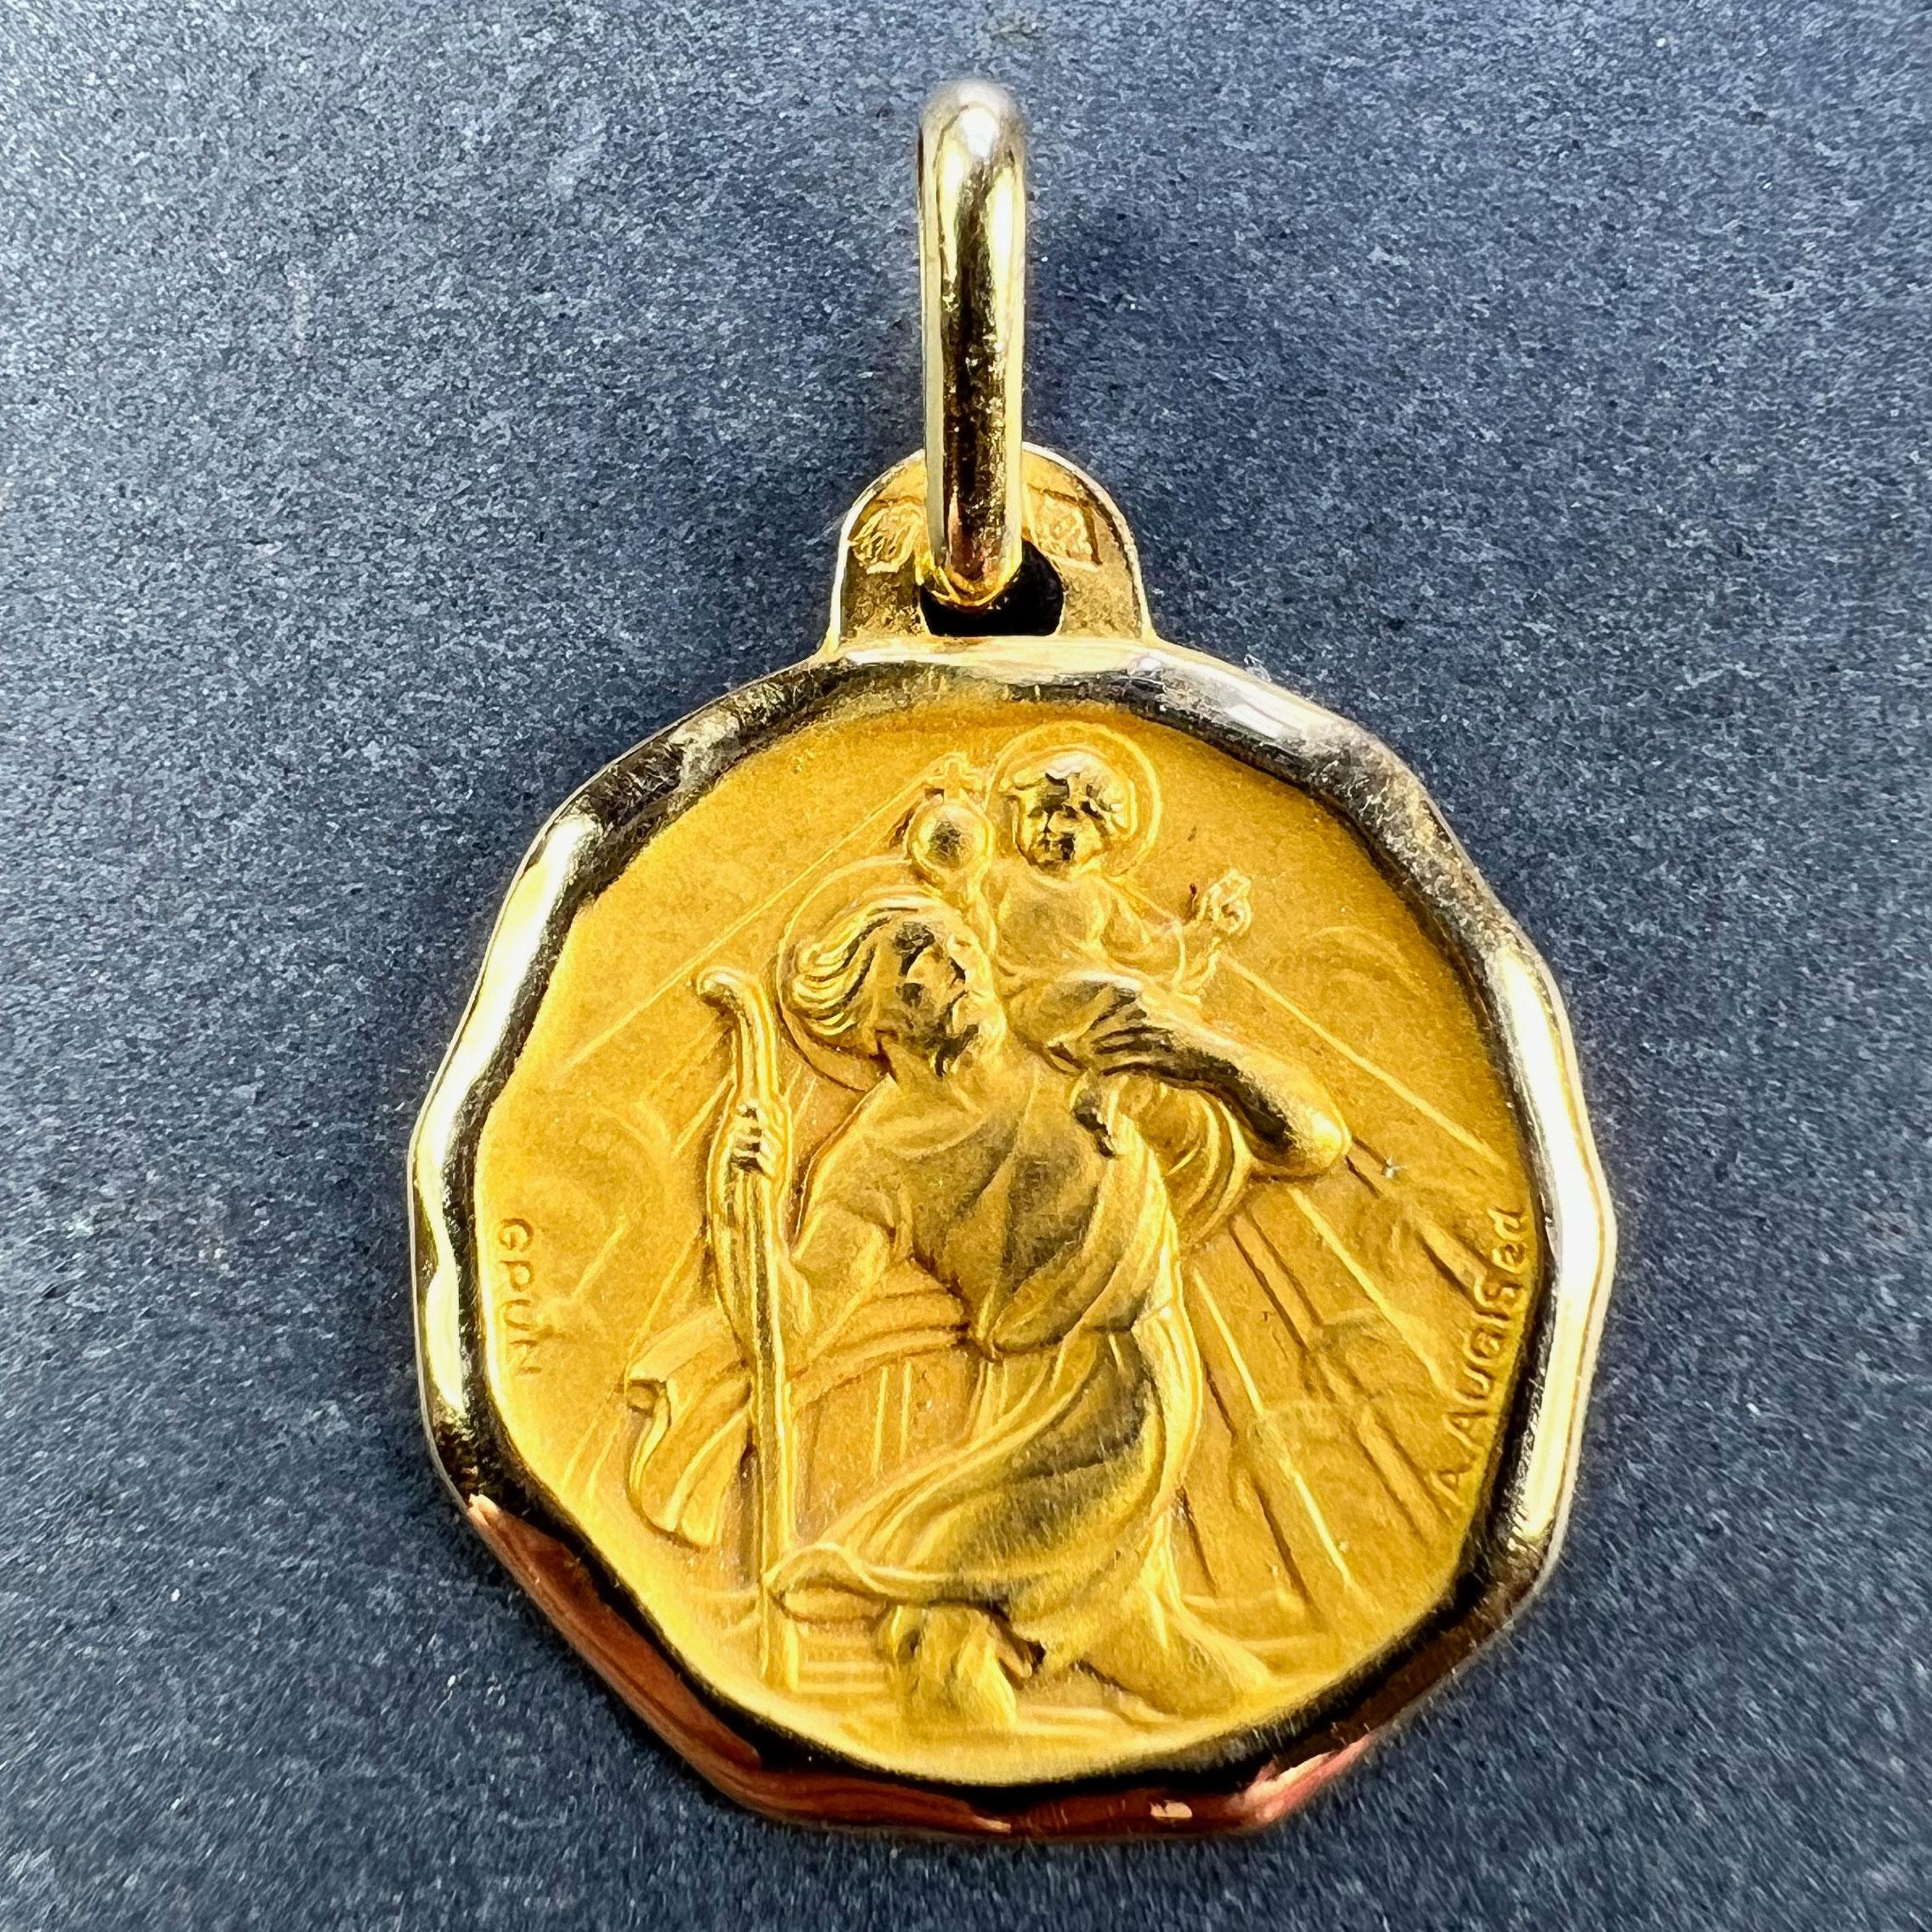 A French 18 karat (18K) yellow gold charm pendant or medal designed by Grun for Augis depicting St Christopher carrying the infant Christ across the river. Stamped with the eagle's head for French manufacture, Augis' makers mark, and signed A. Augis